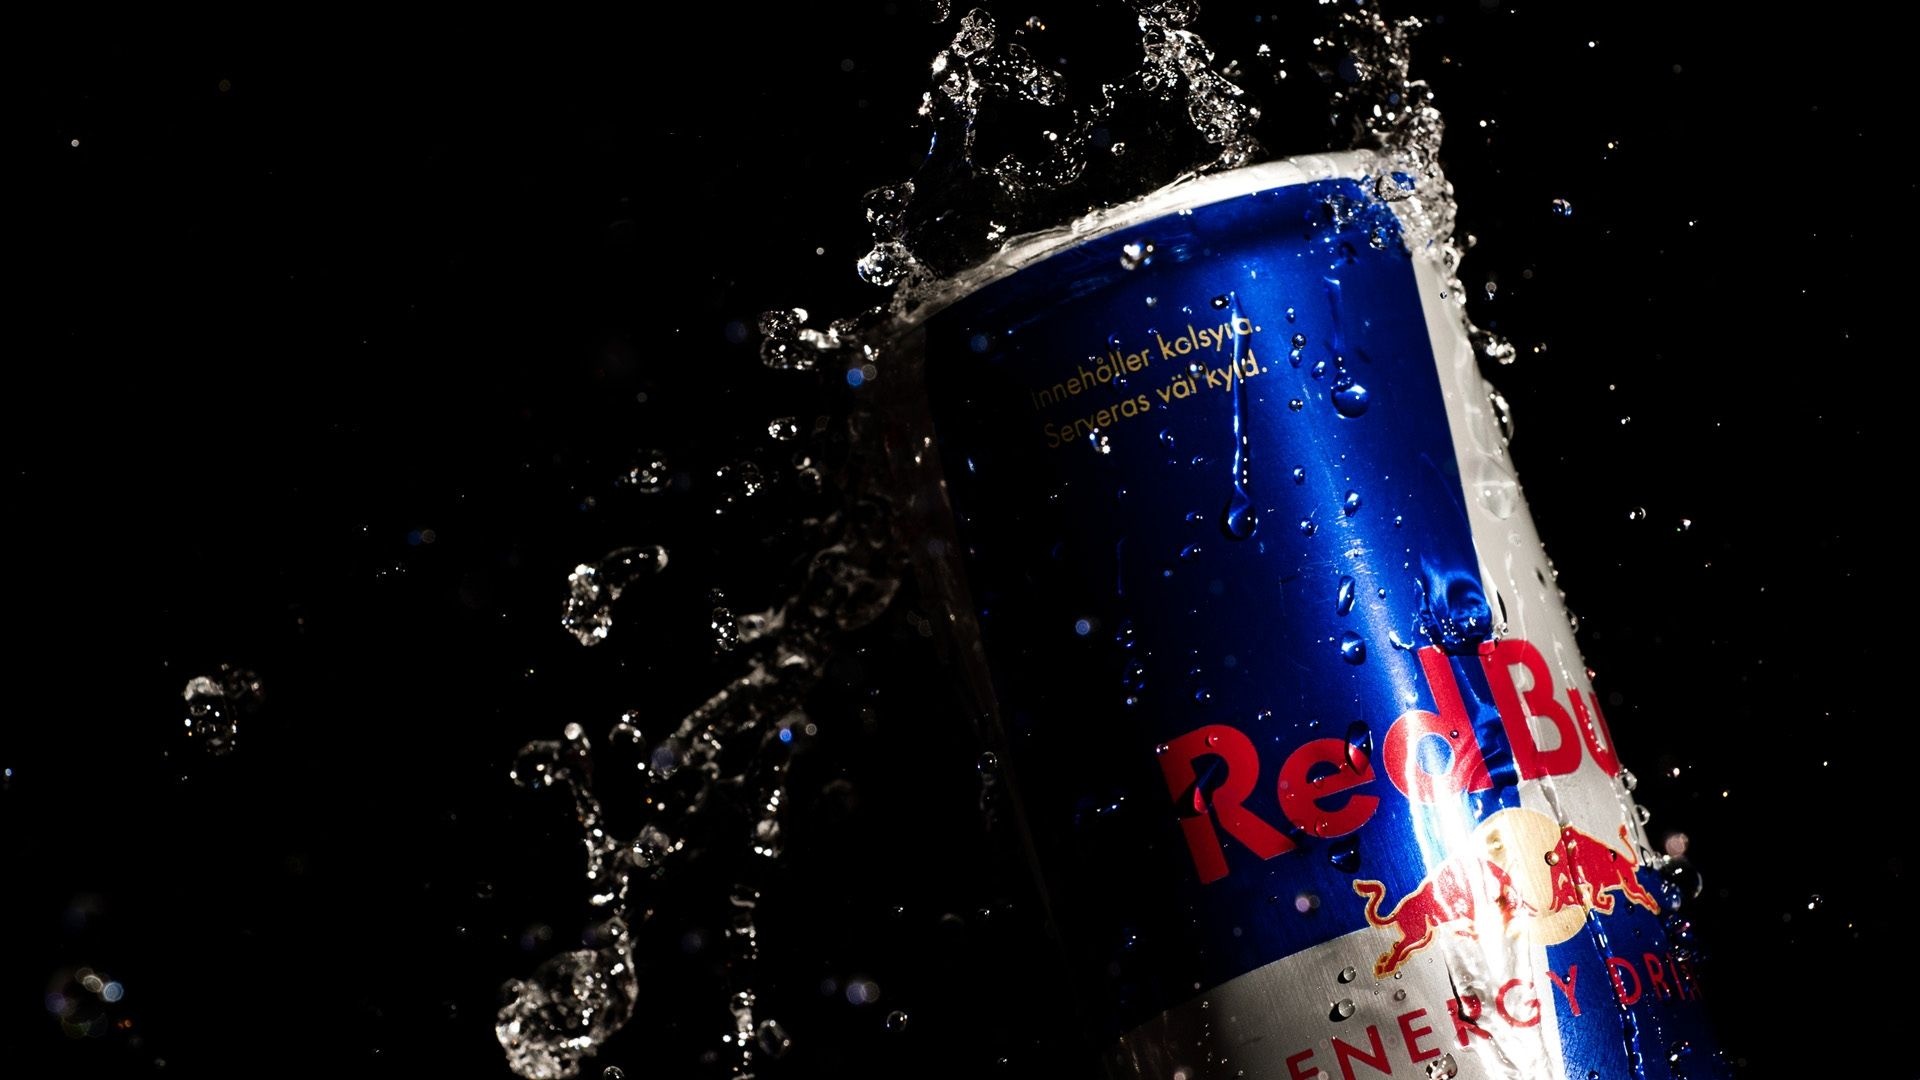 Red Bull Logo: An 80-mg caffeinated, Taurine-containing beverage. 1920x1080 Full HD Wallpaper.